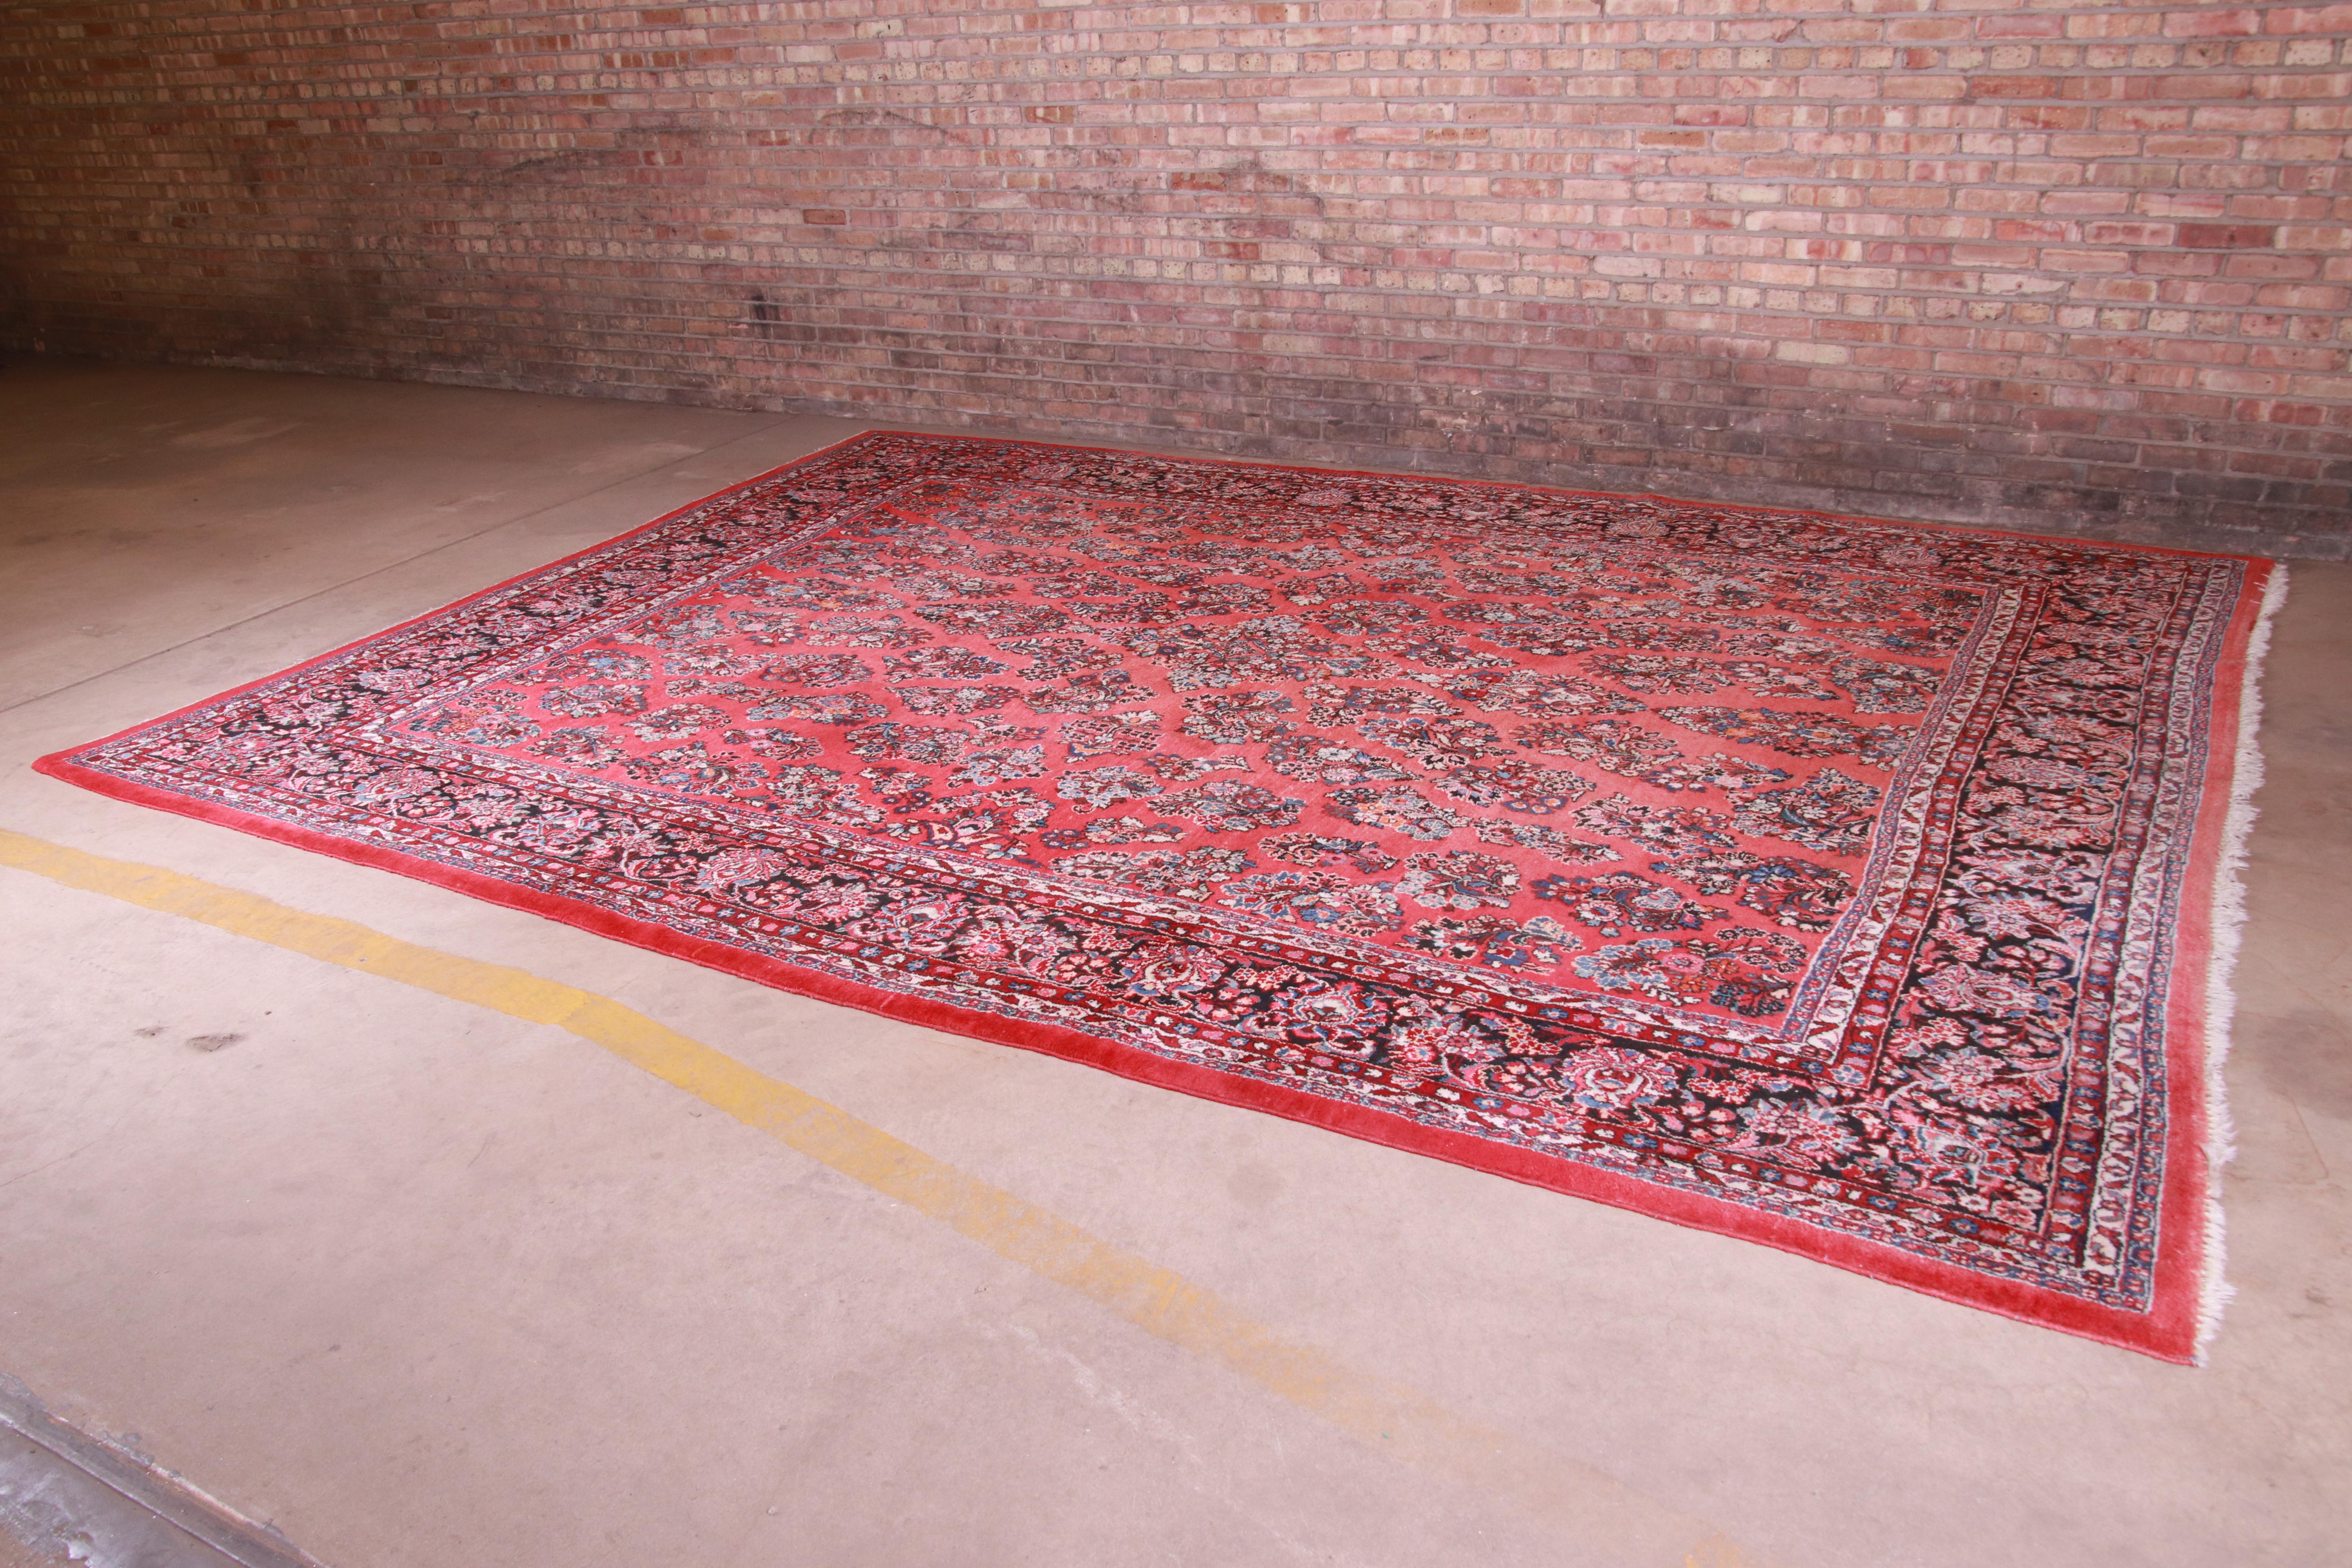 A gorgeous vintage hand-knotted Persian Sarouk room size rug

Persia, Mid-20th Century

Classic design with floral sprays and bouquets

Measures: 10